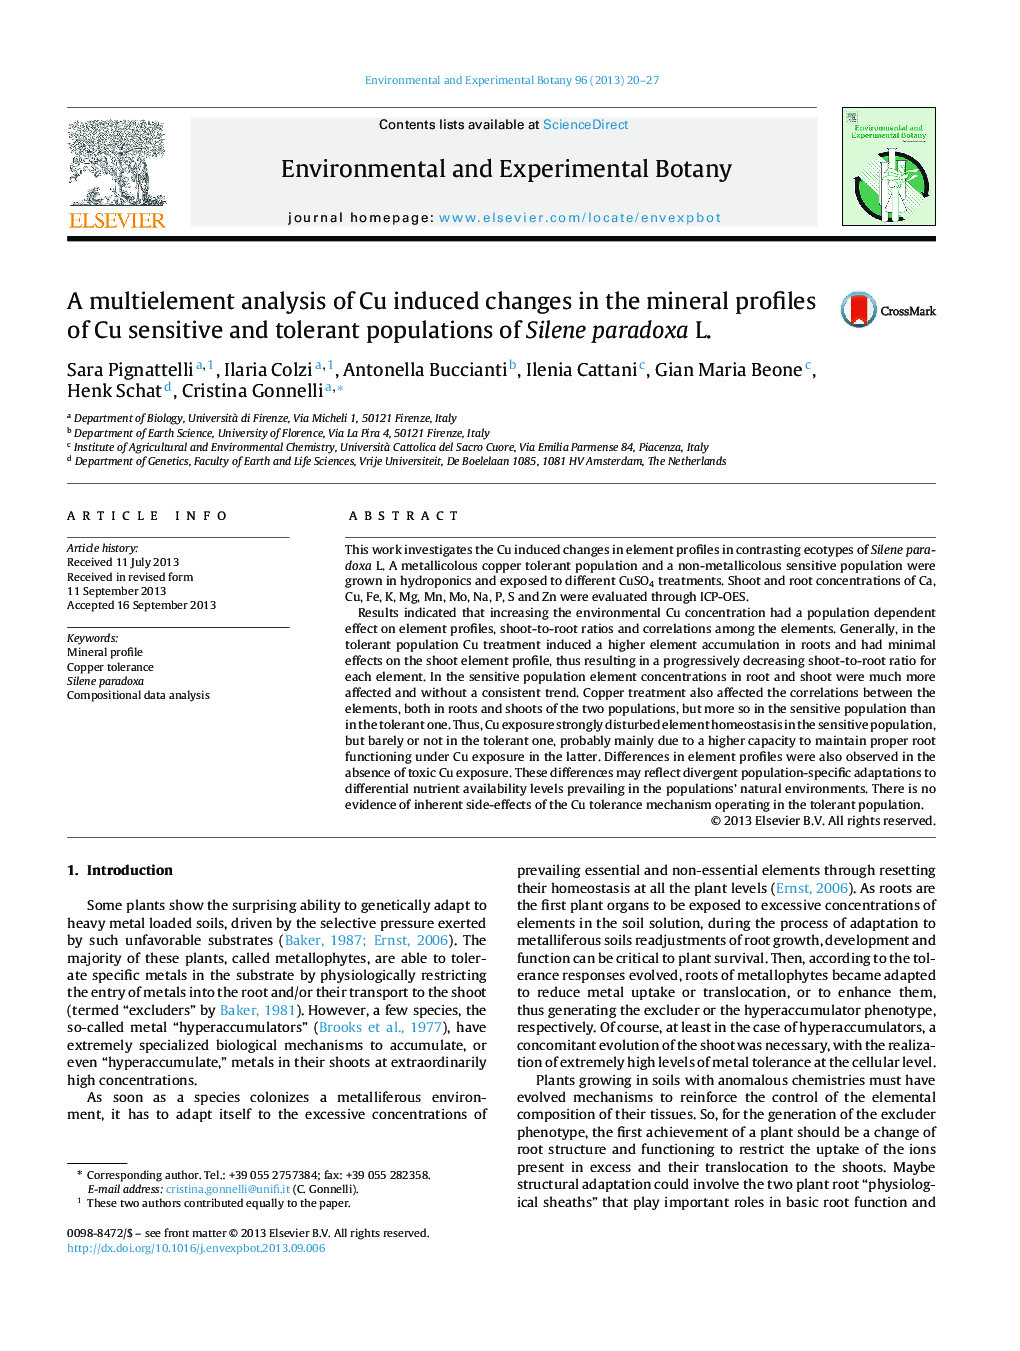 A multielement analysis of Cu induced changes in the mineral profiles of Cu sensitive and tolerant populations of Silene paradoxa L.